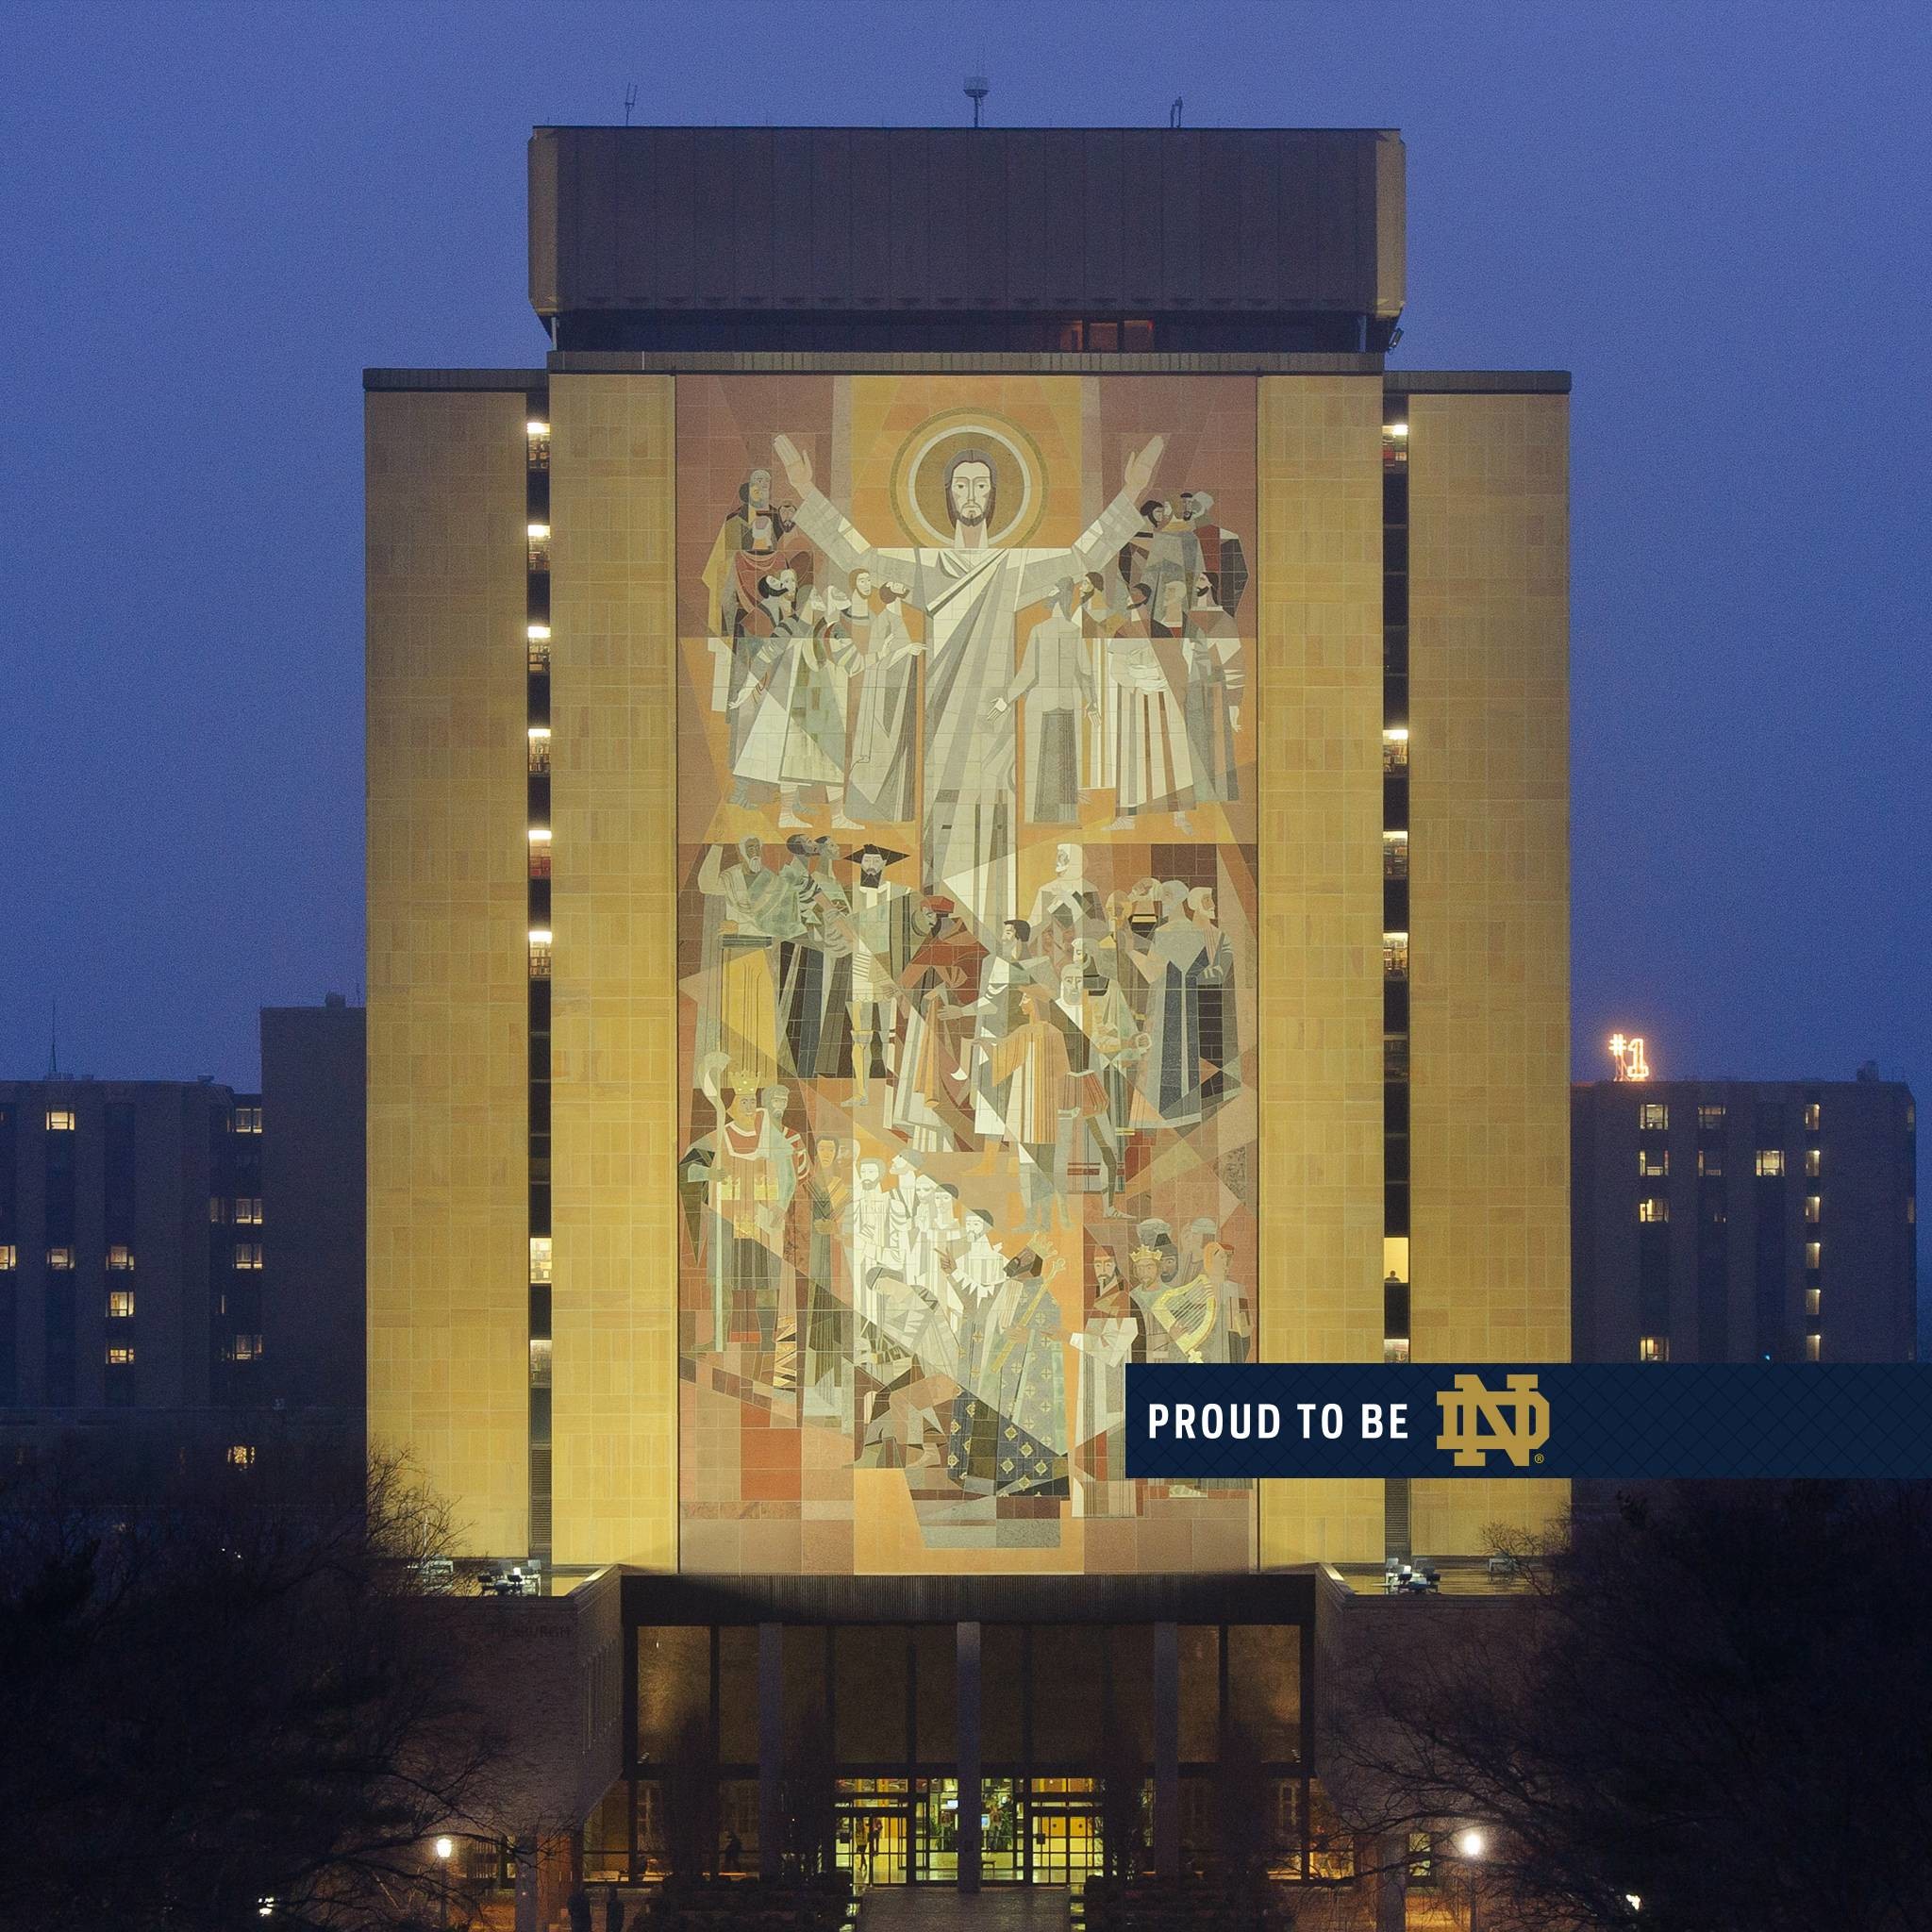 2048x2048 Backgrounds // Proud to Be ND // University of Notre Dame